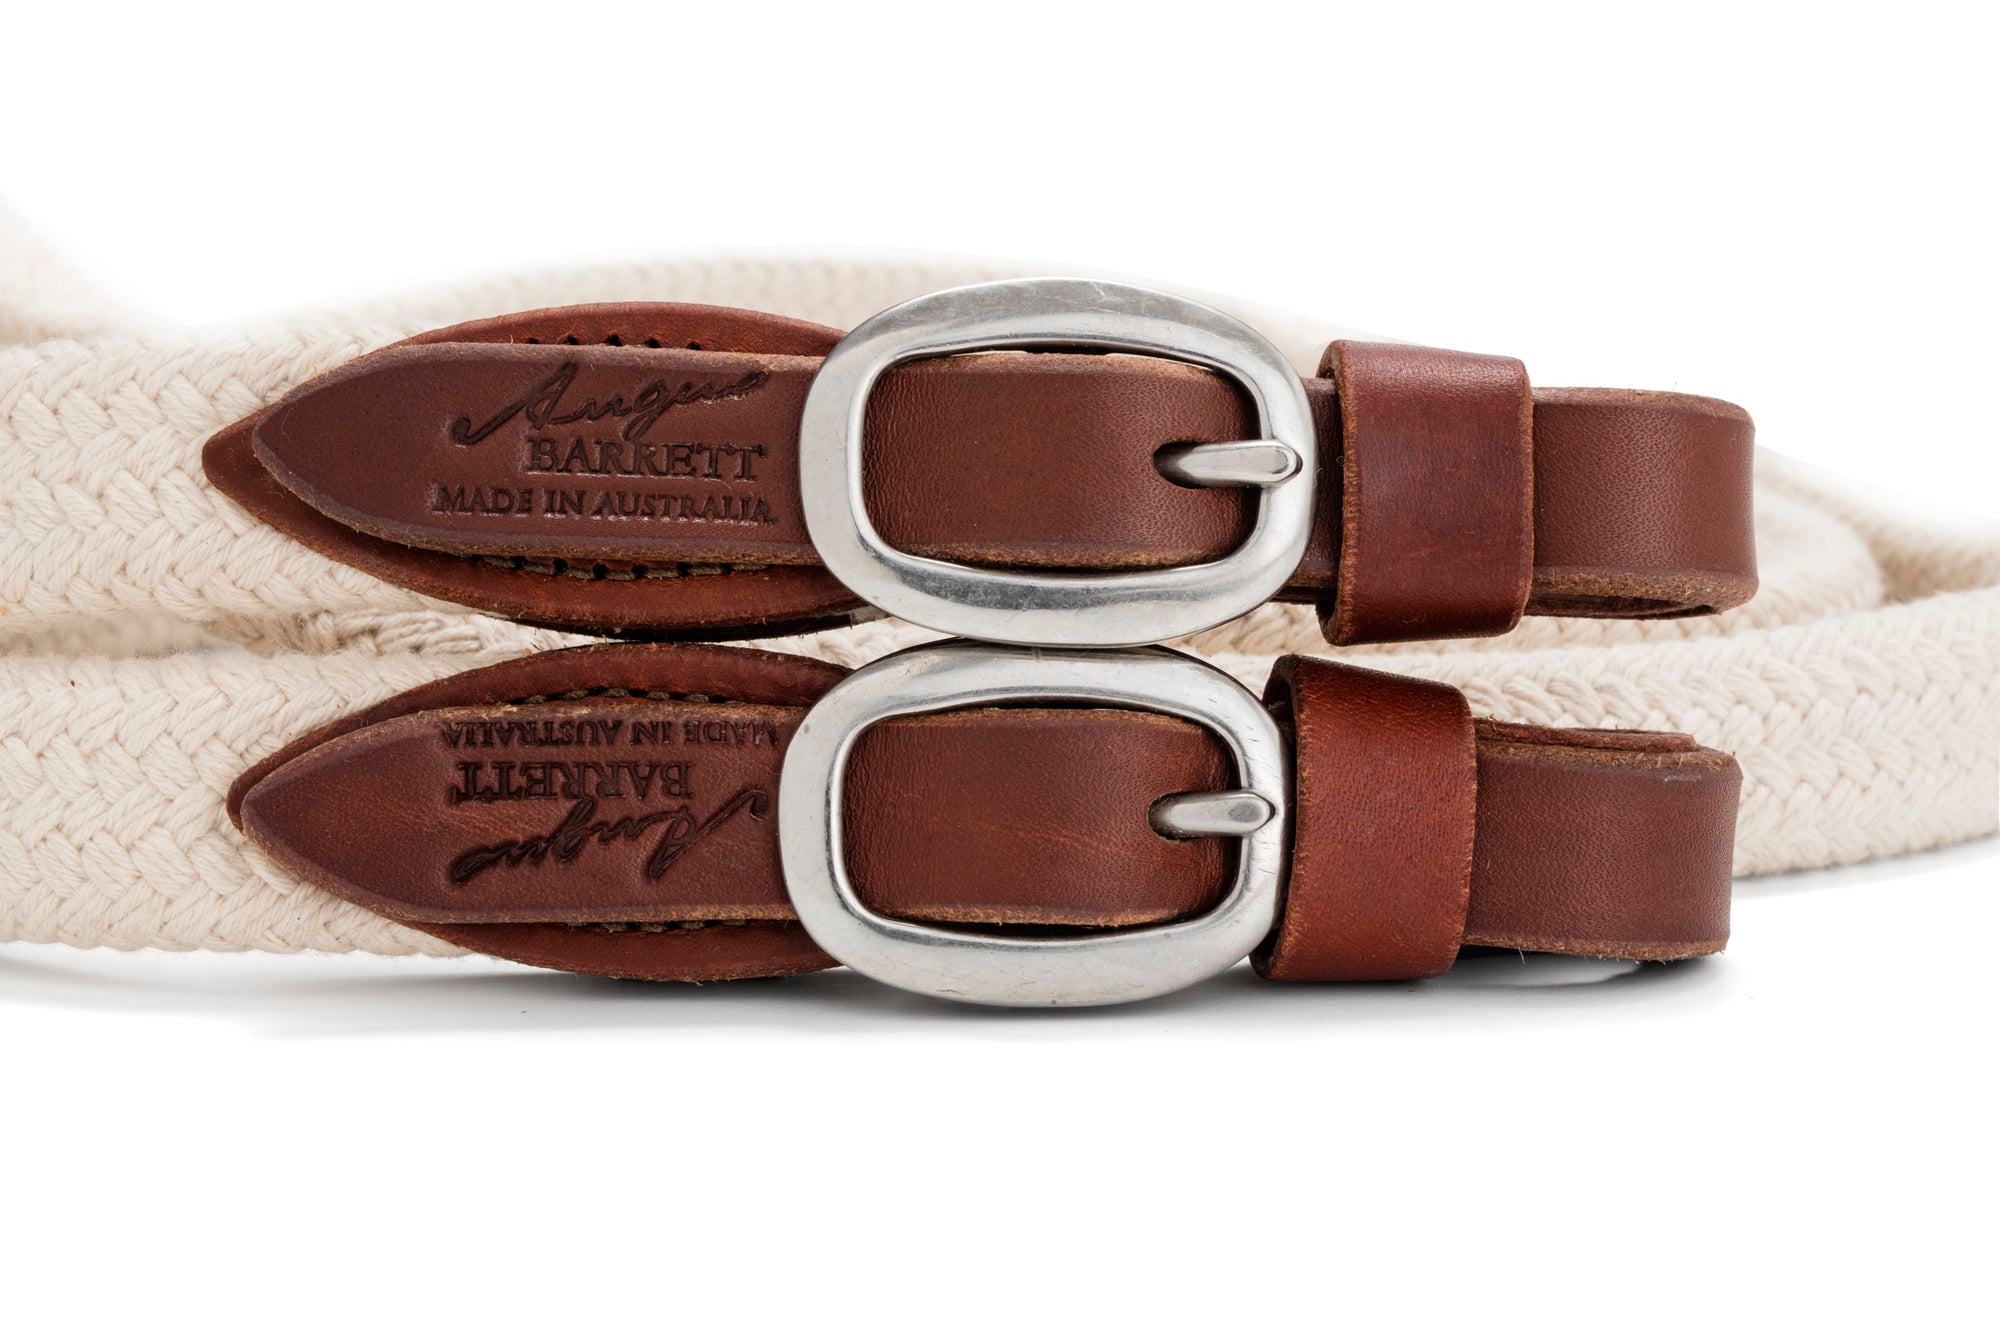 Angus Barrett Soft Cotton Reins - Natural with Stainless Steel buckles